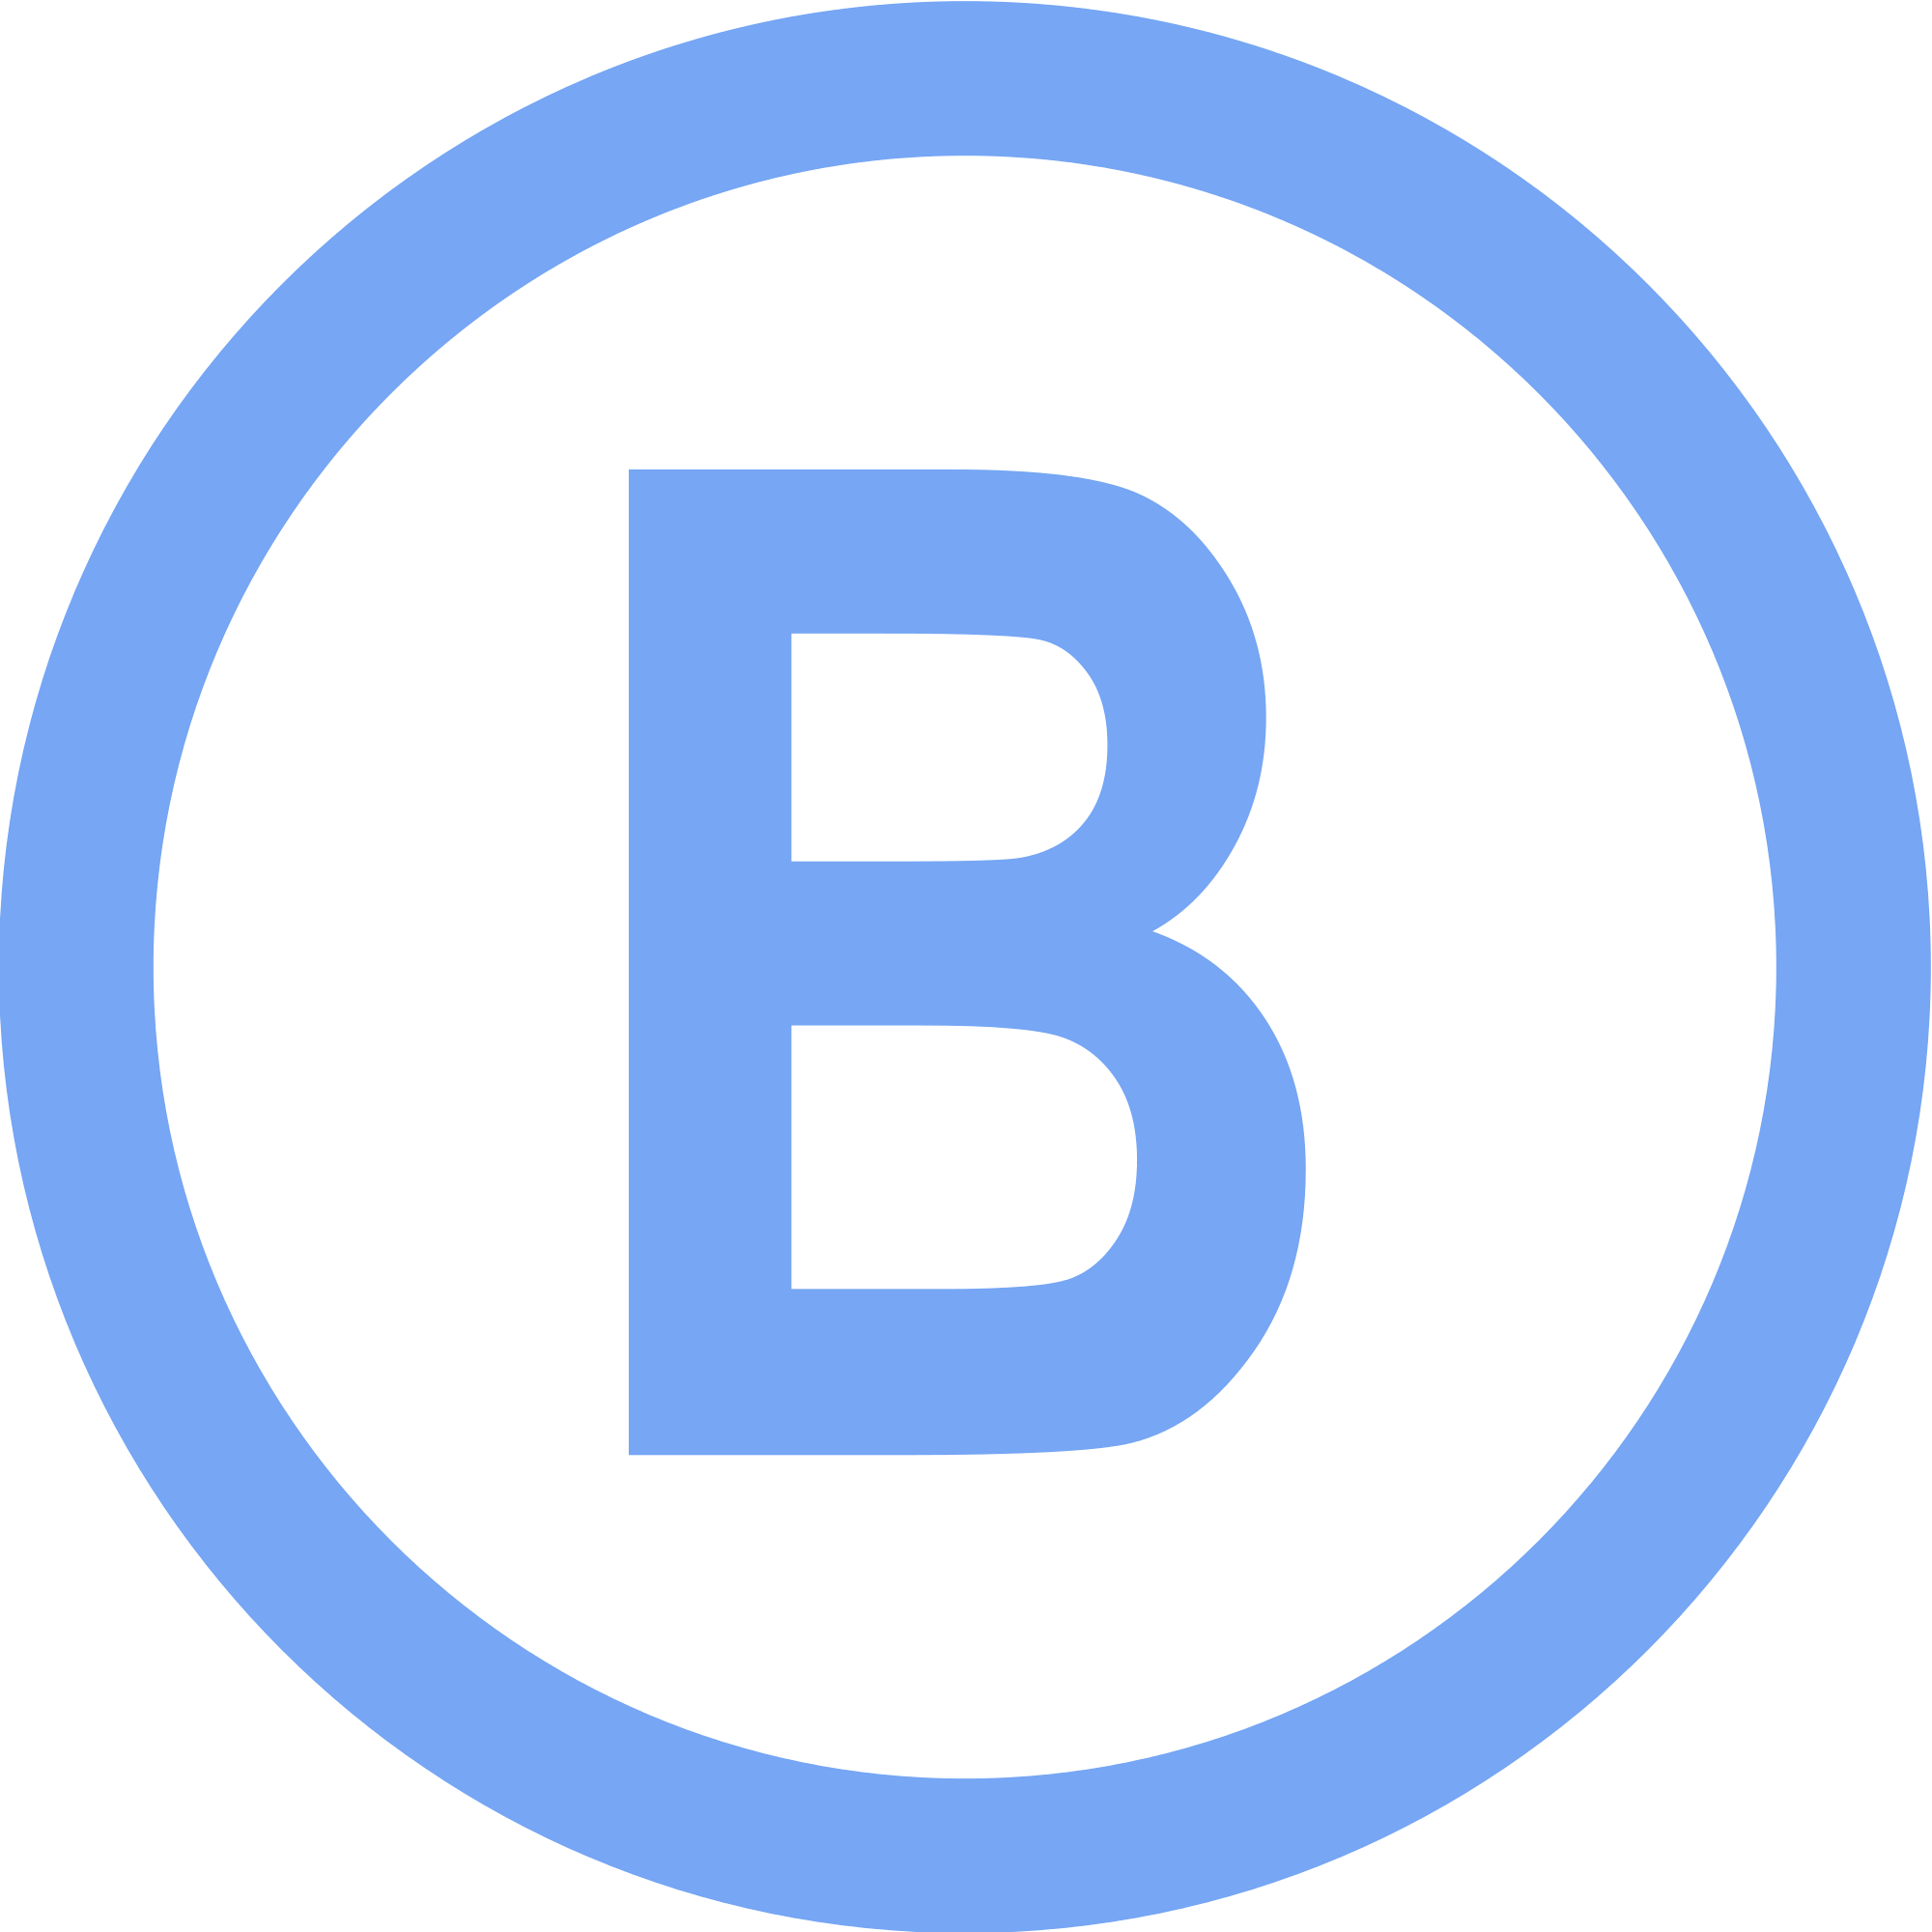 B in Circle Logo - File:Logo ligne B Narbonne.png - Wikimedia Commons